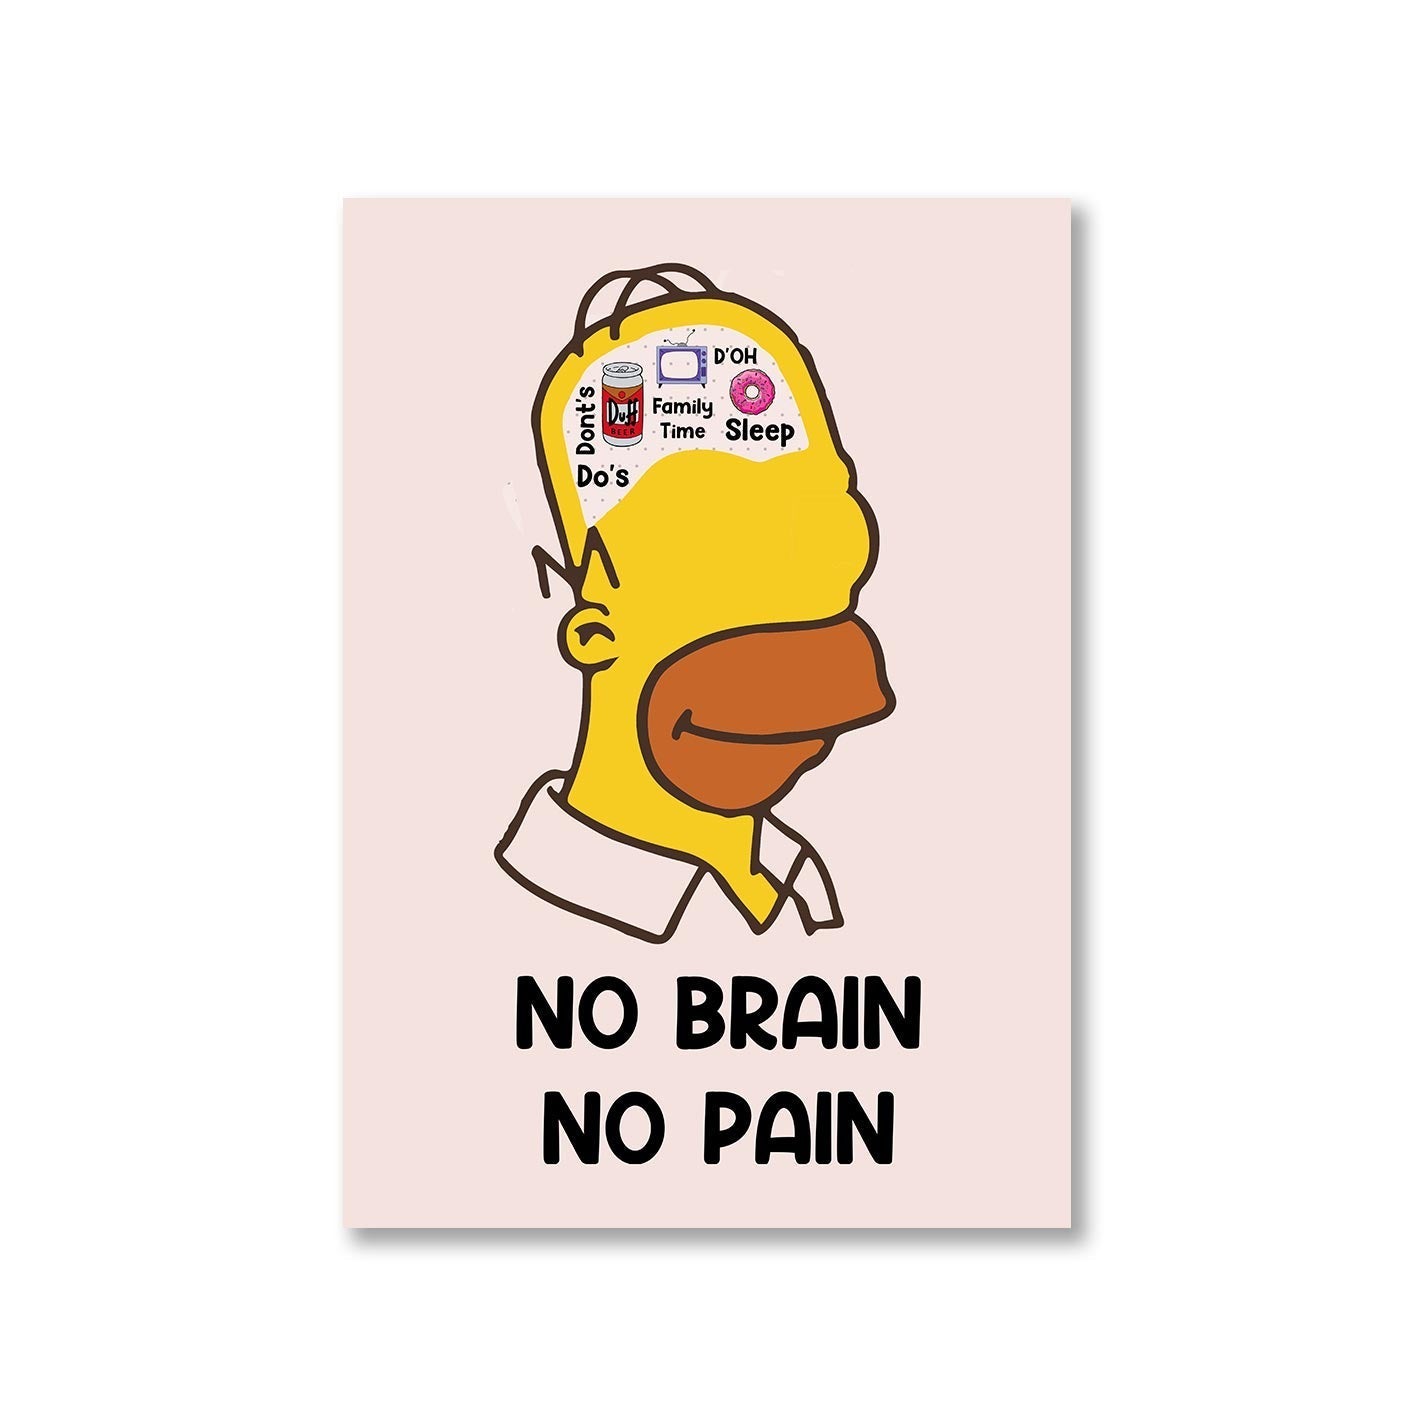 the simpsons no brain no pain poster wall art buy online united states of america usa the banyan tee tbt a4 - homer simpson